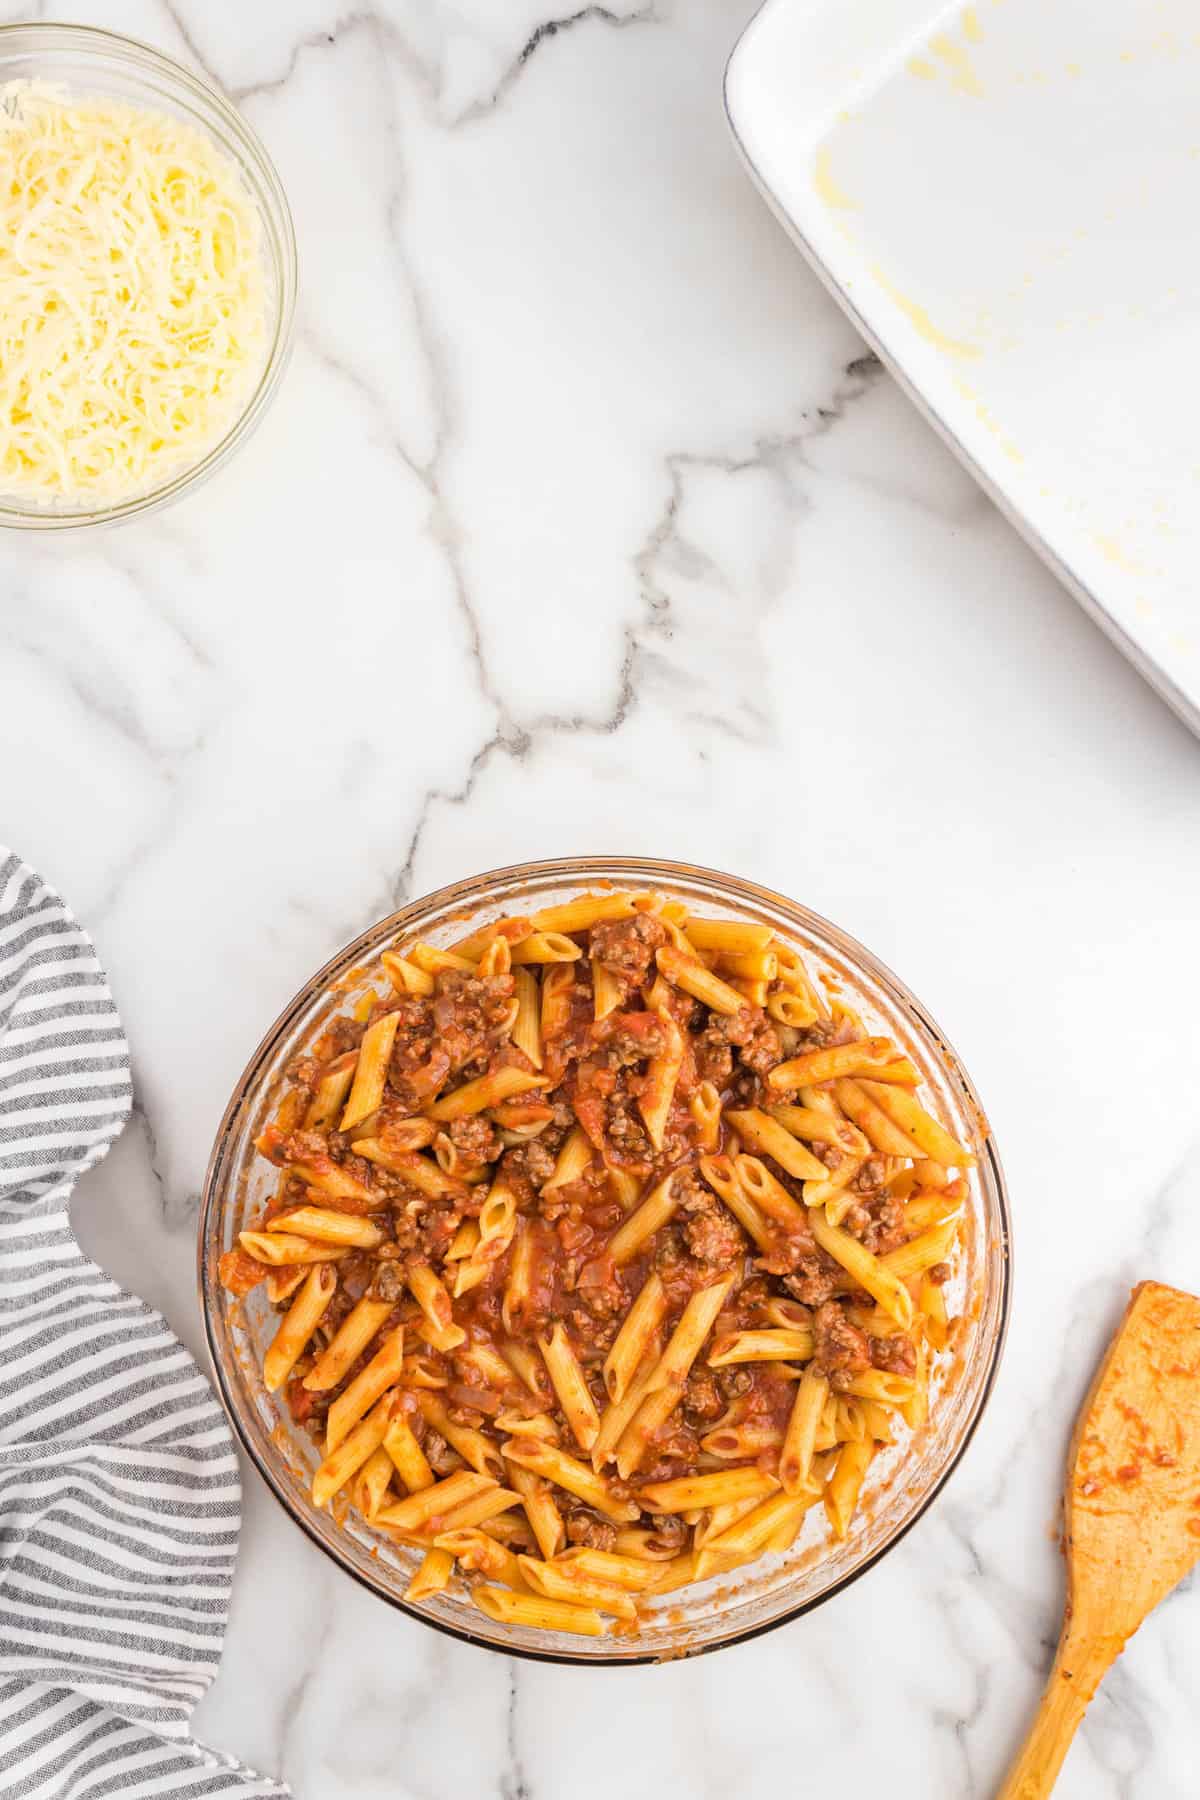 Tossed ground beef mixture and cooked penne noodles in glass mixing bowl for Hamburger Casserole